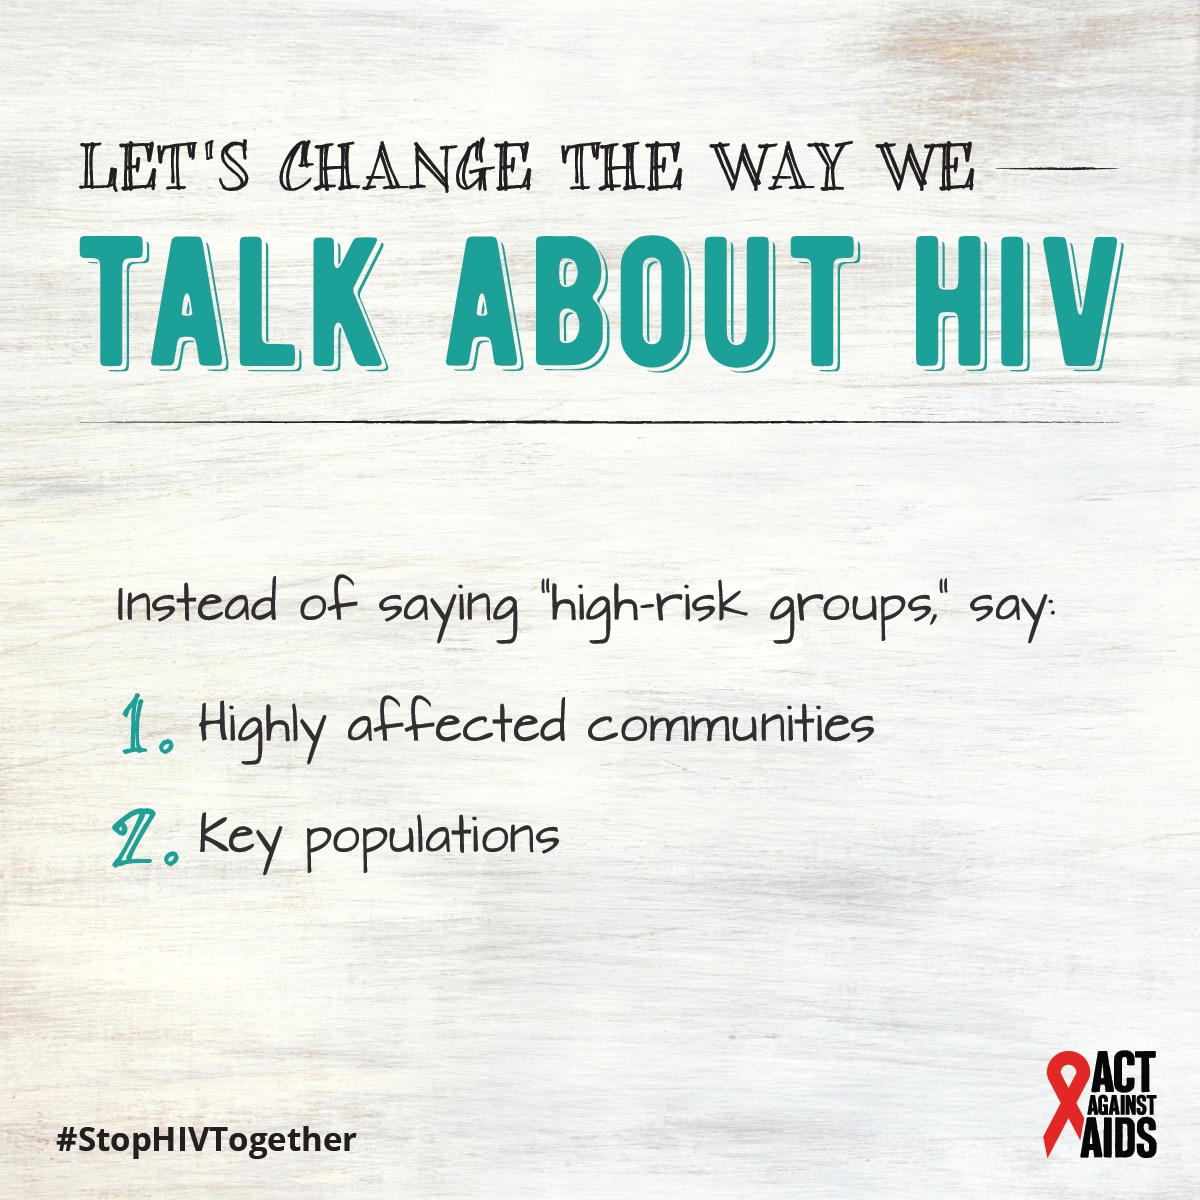 Let's change the way we talk about HIV. Instead of saying "high-risk groups", say highly affected communities or key populations.